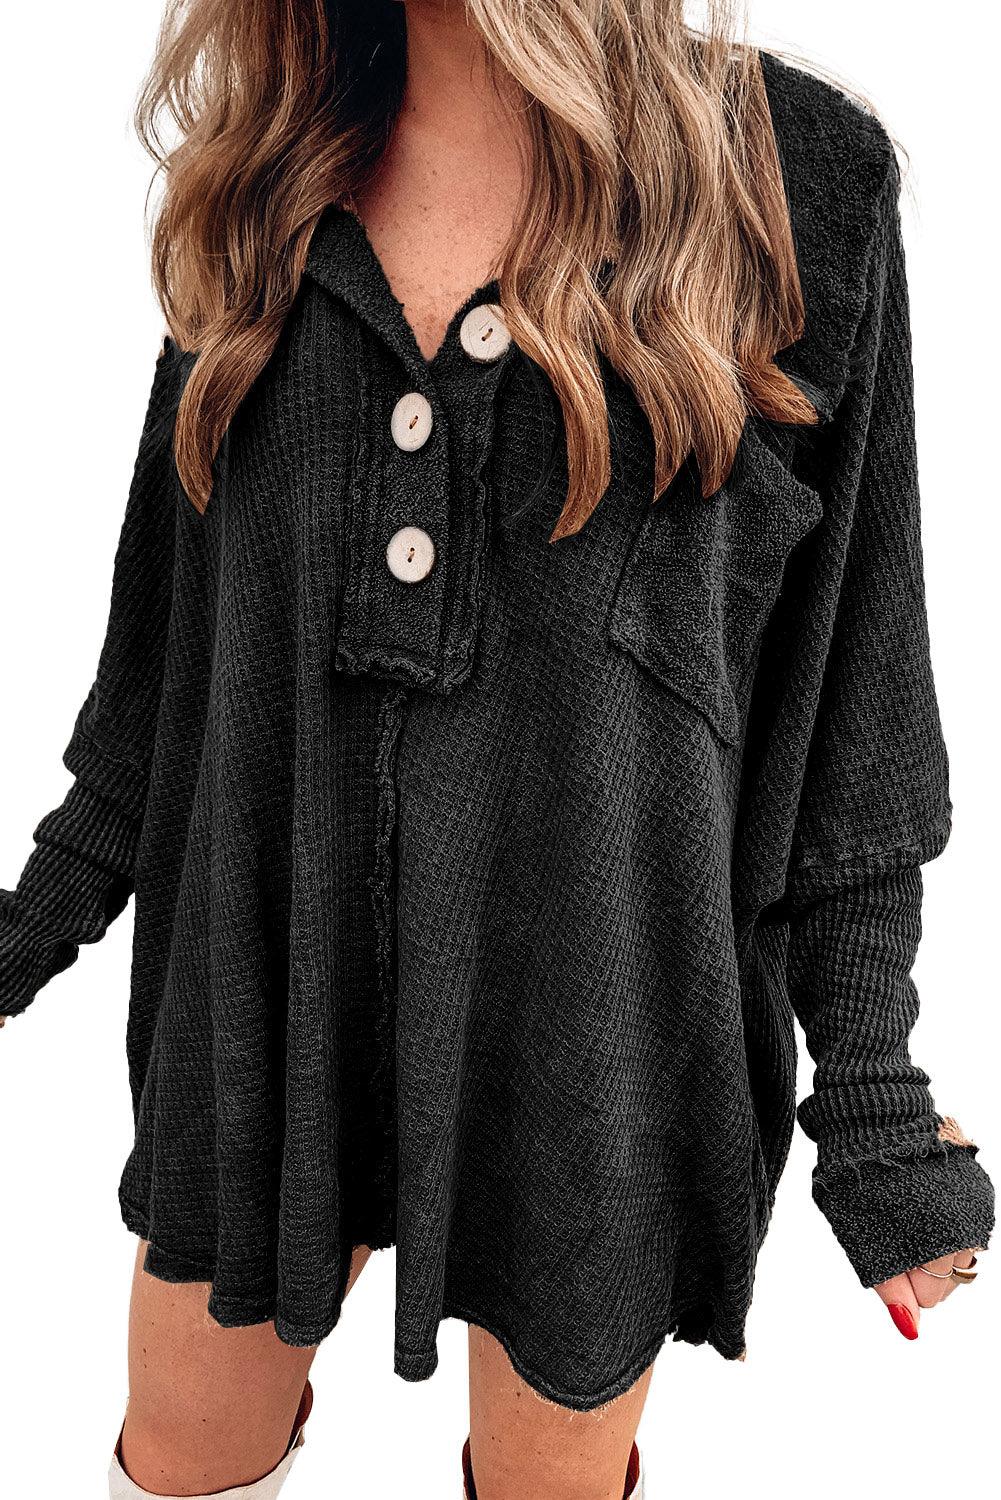 Waffle Knit Buttoned Long Sleeve Top - L & M Kee, LLC